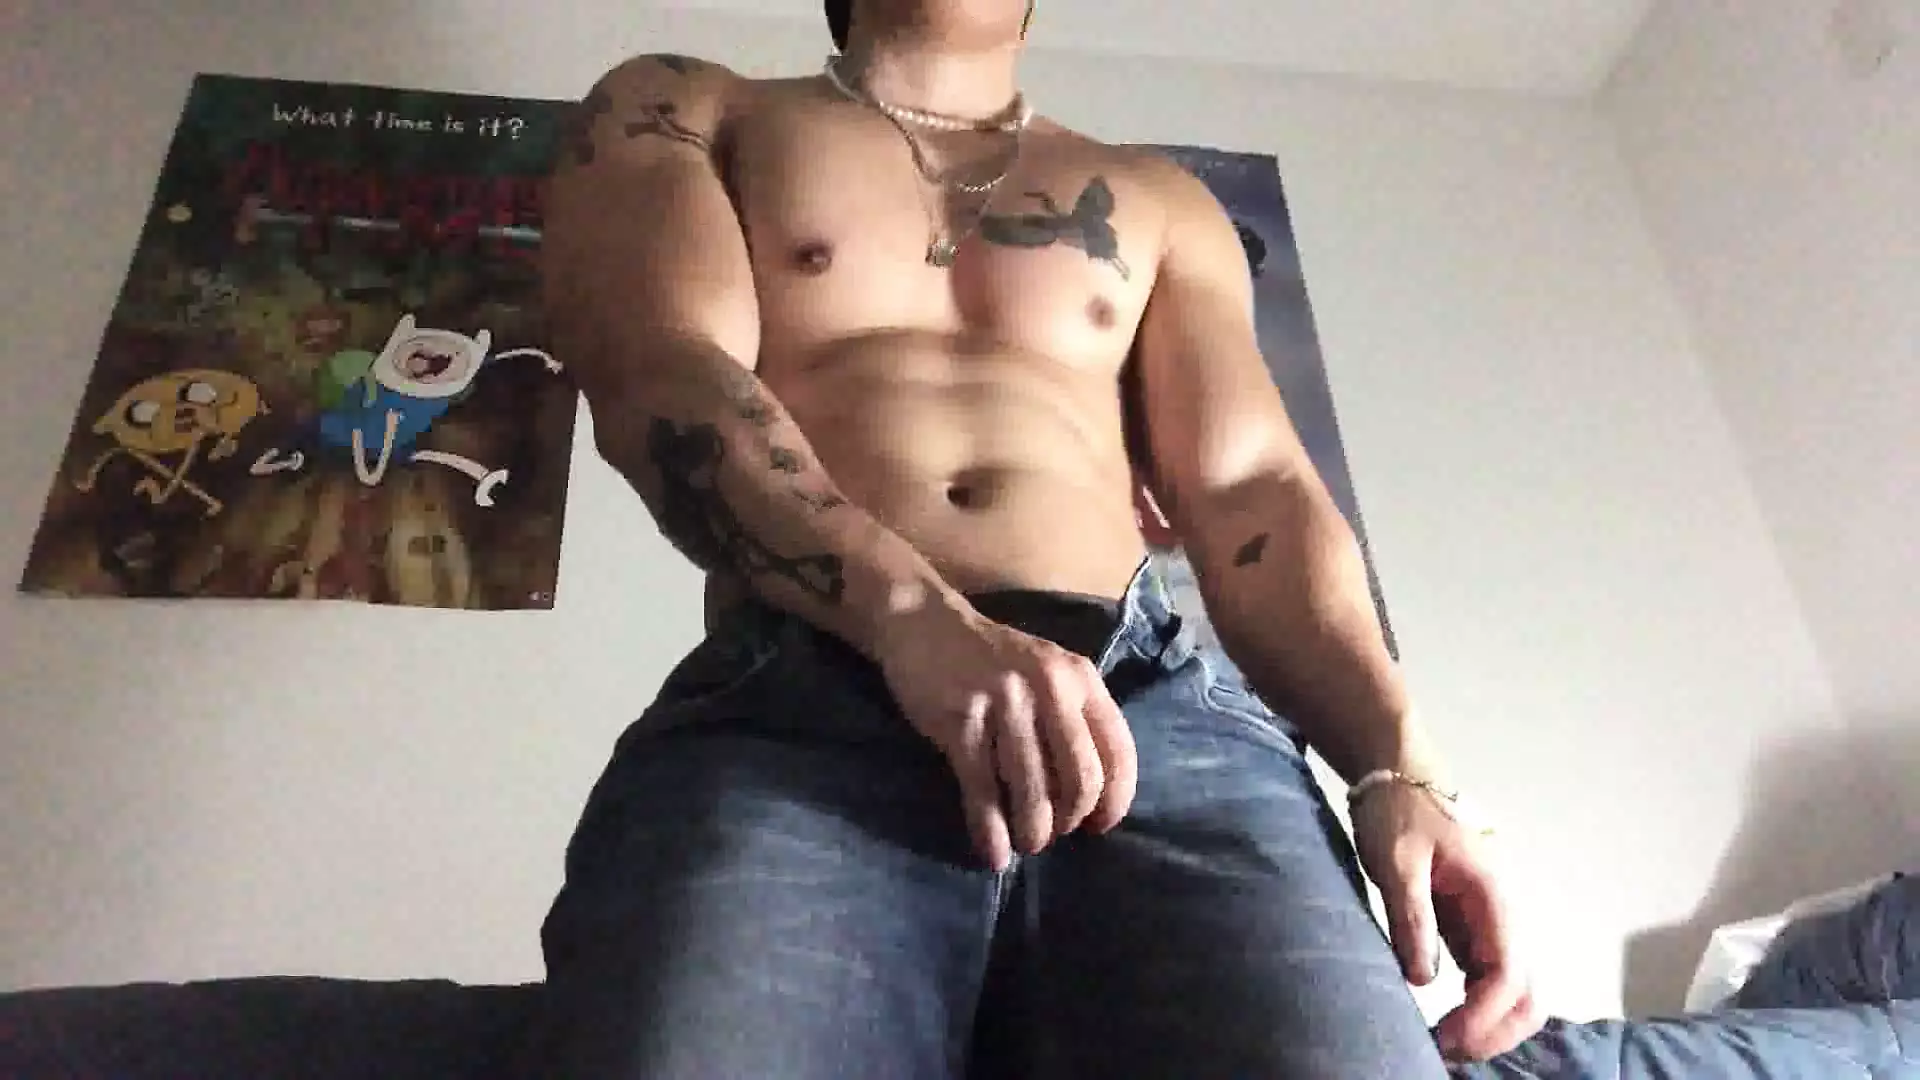 College Men Solo Porn - College asian jock solo flexing and massaging muscles watch online